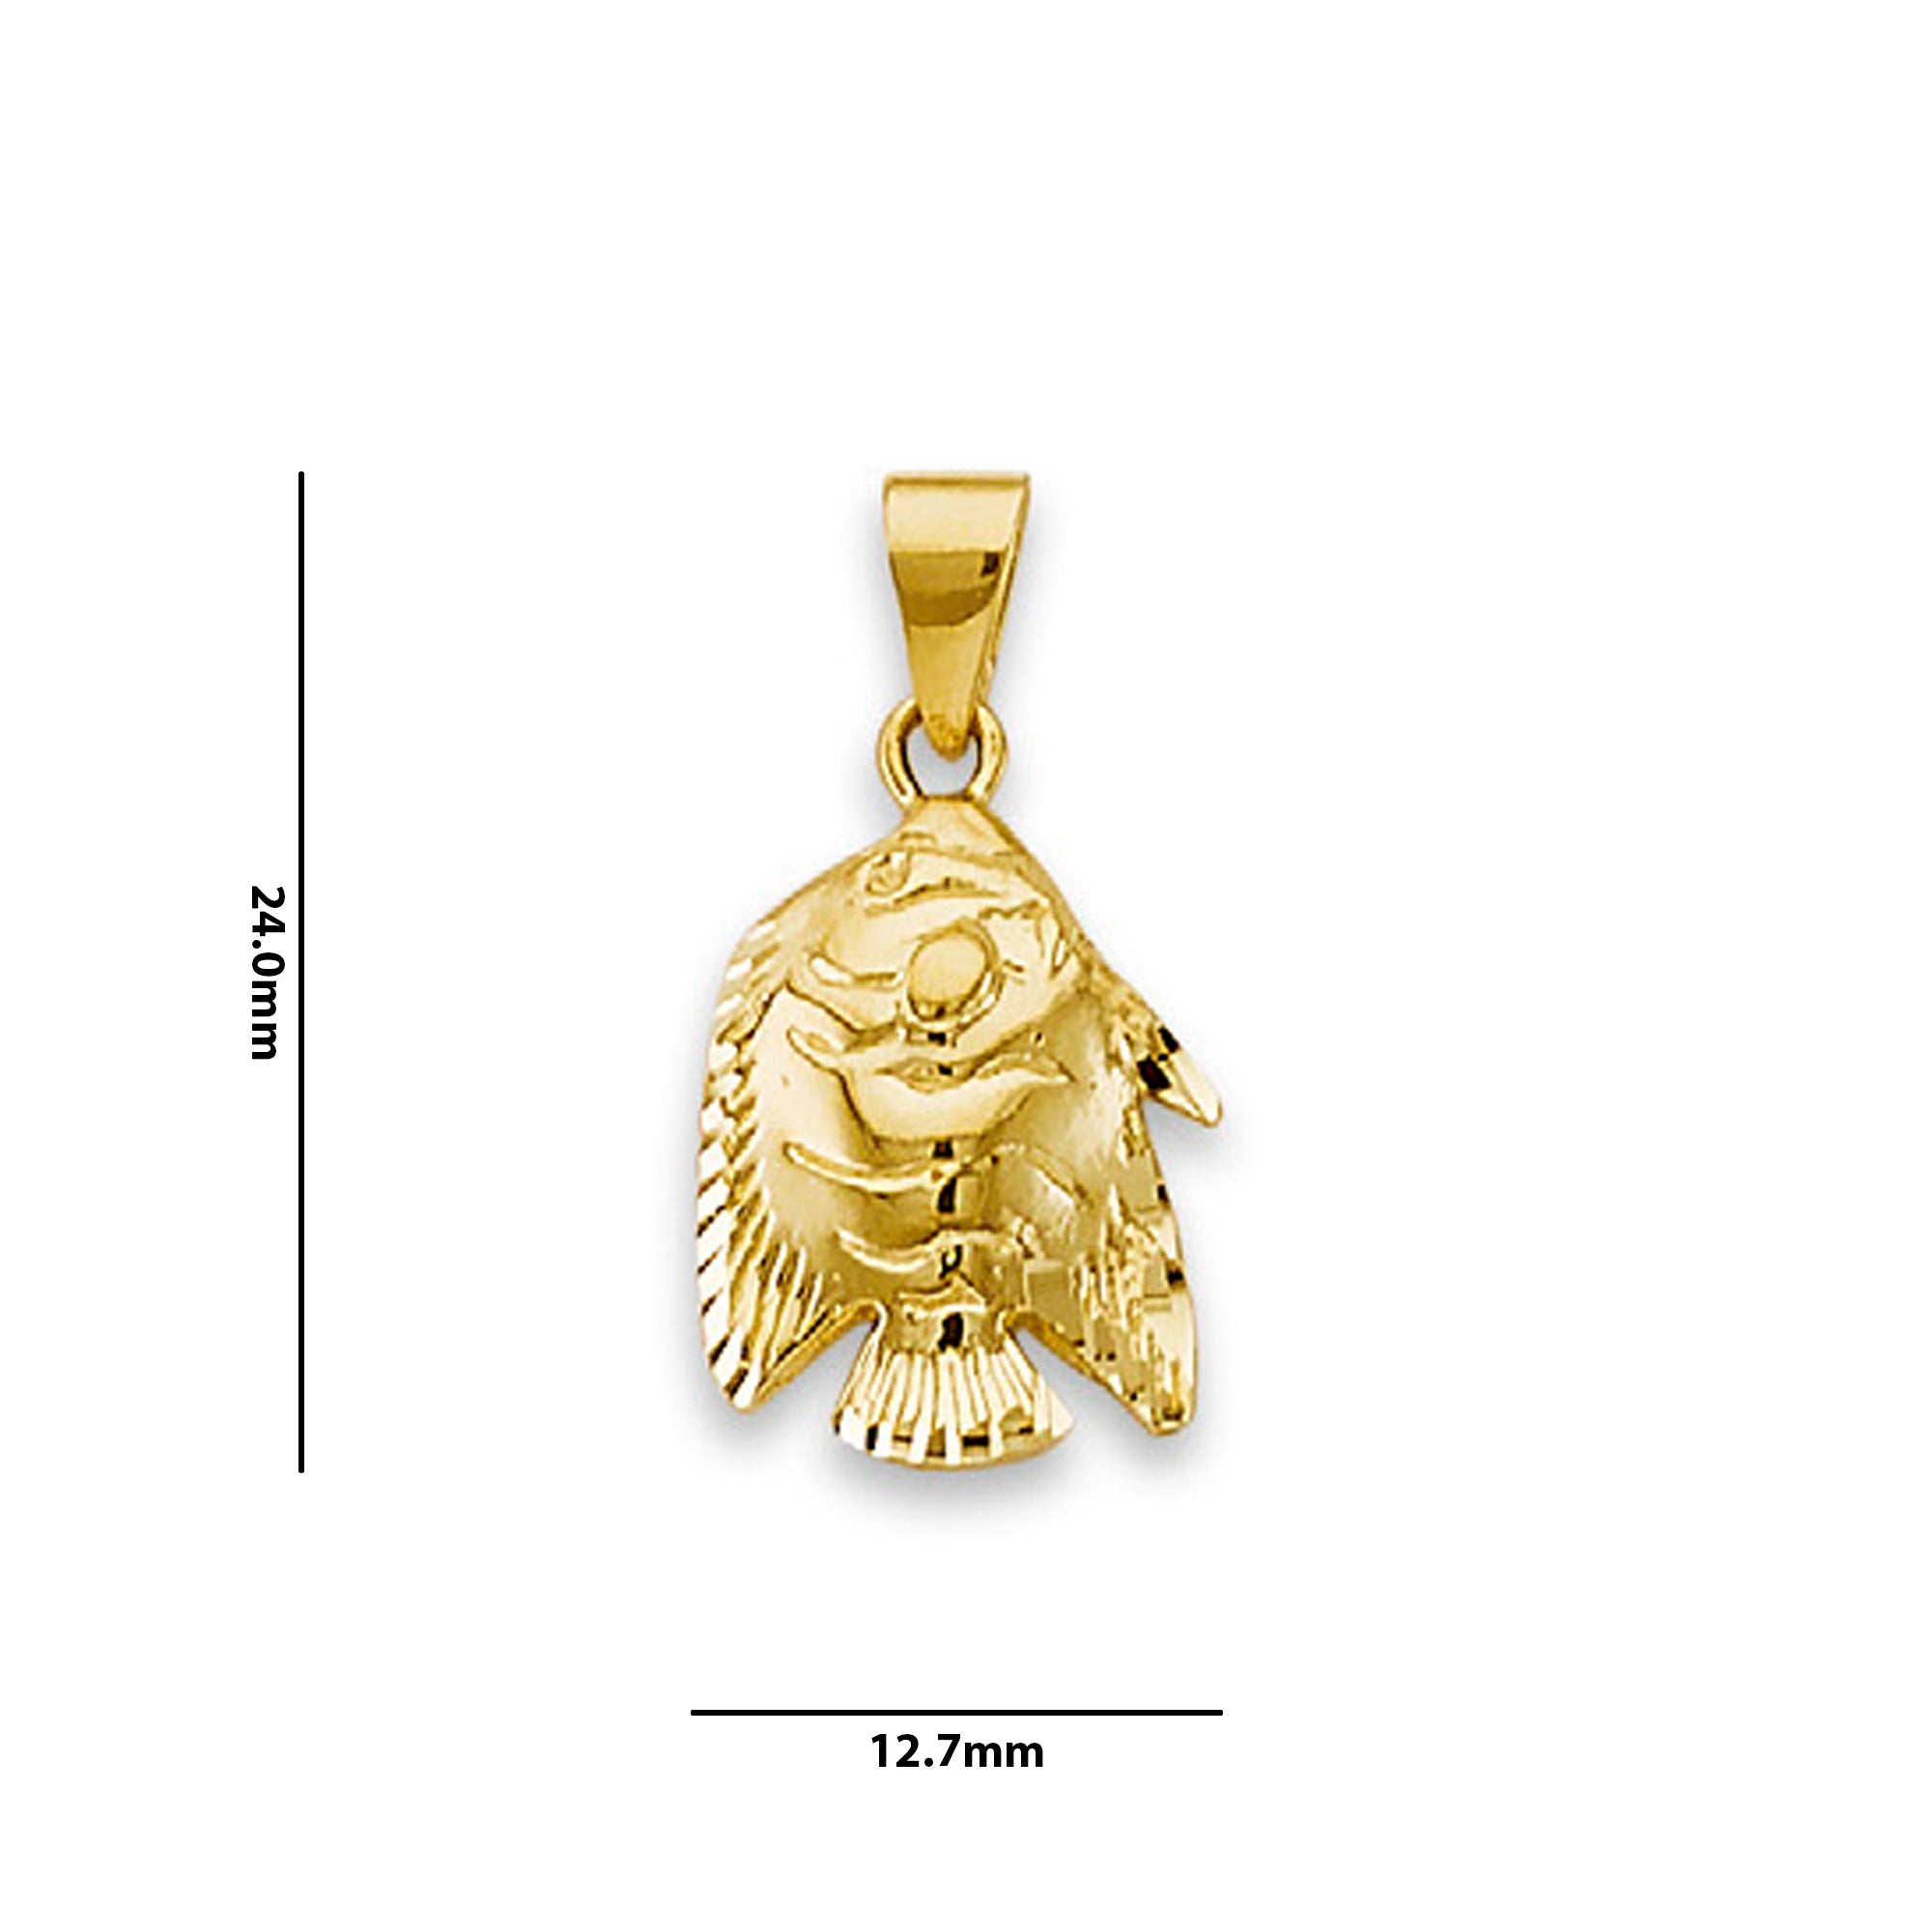 Yellow Gold Detailed Vintage Fish Charm Pendant with Measurement